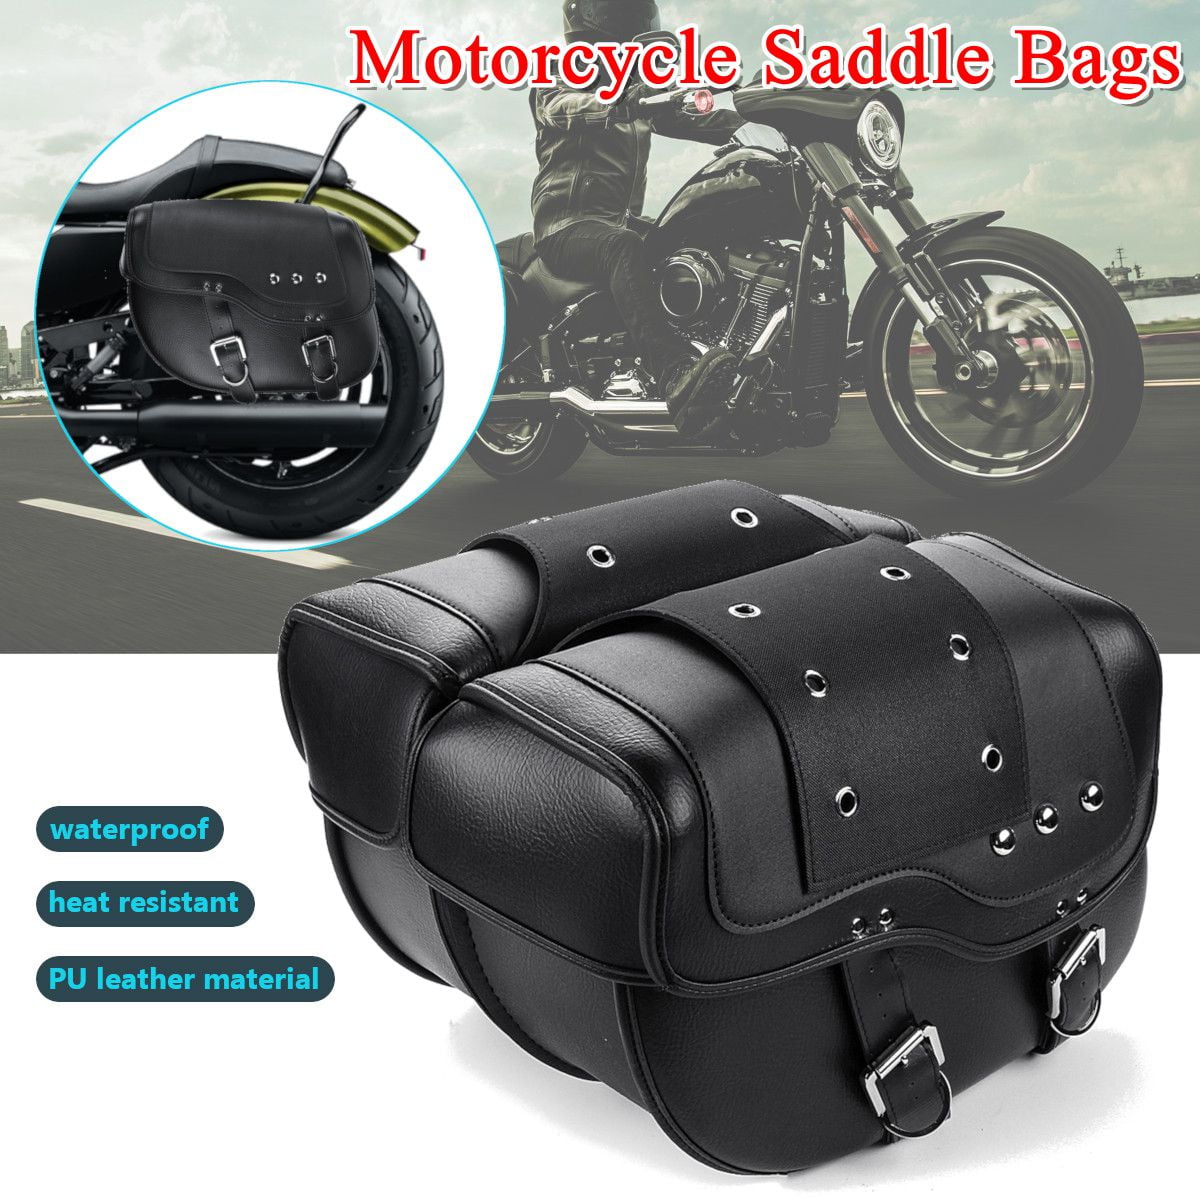 Motorcycle Saddebags Throw Over Saddle bags Panniers Side Bags with cup holder and lock for Sportster 